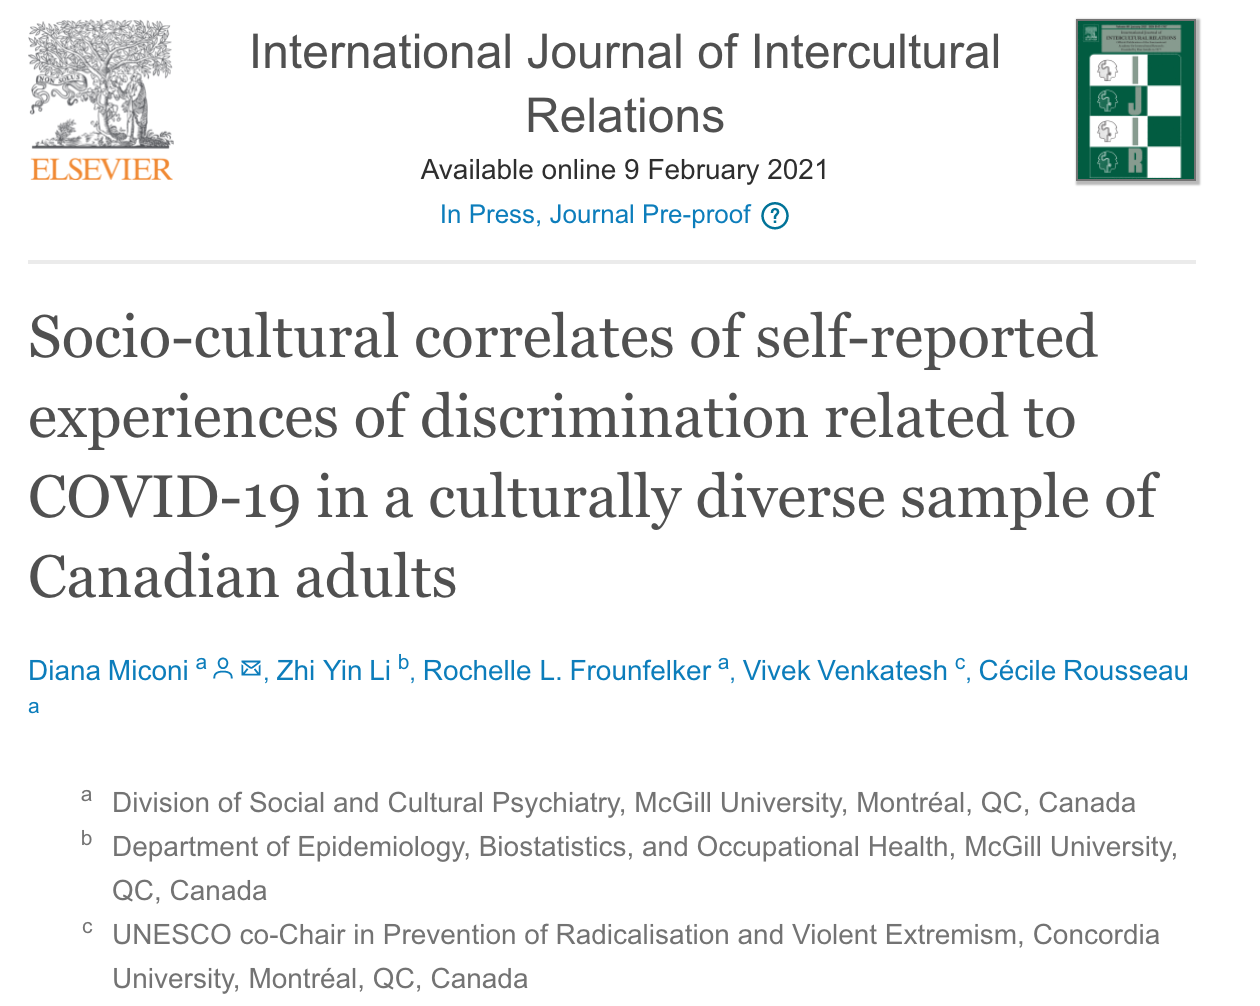 New Publication on Perceived Discrimination Experiences in Canadian Communities in a COVID-19 Context.